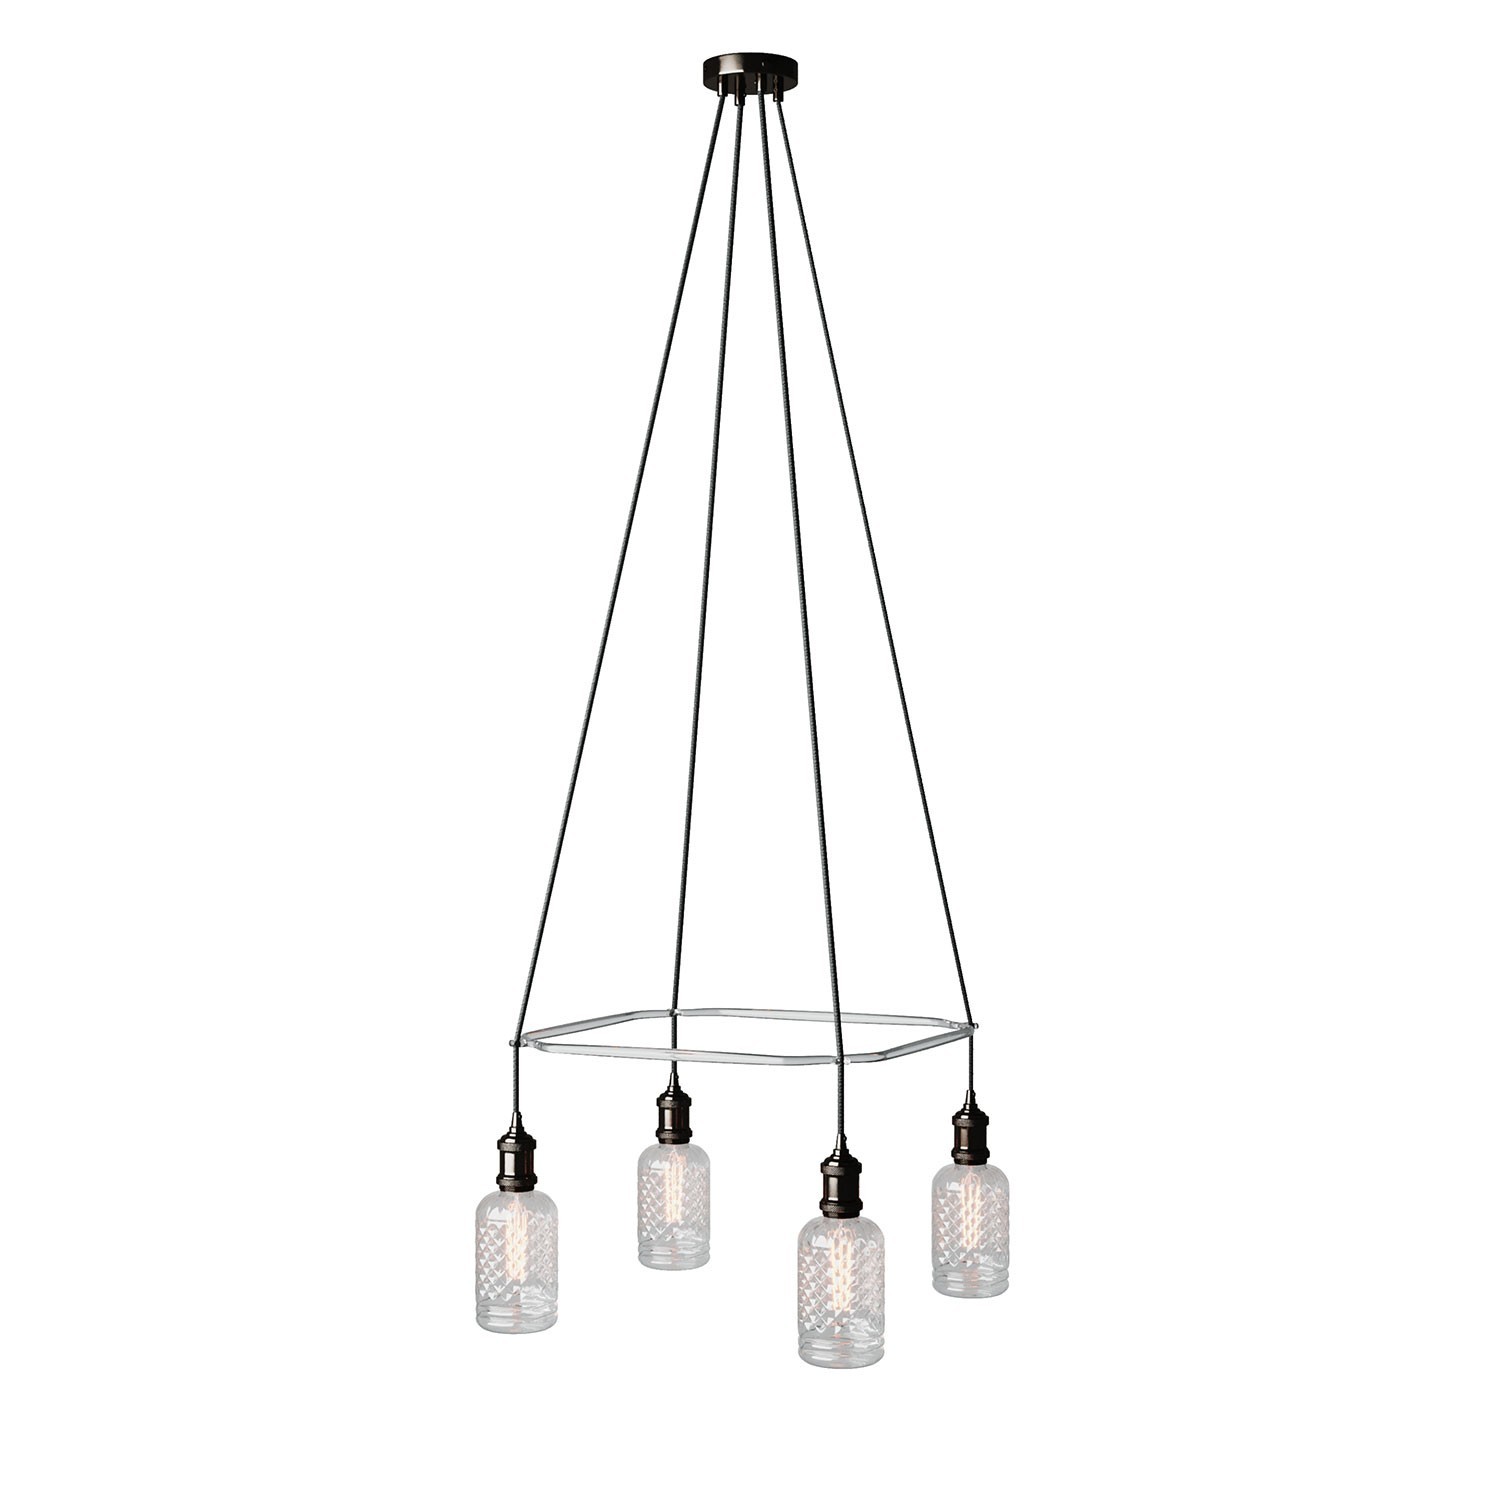 4-fall Cage Crystal lampe